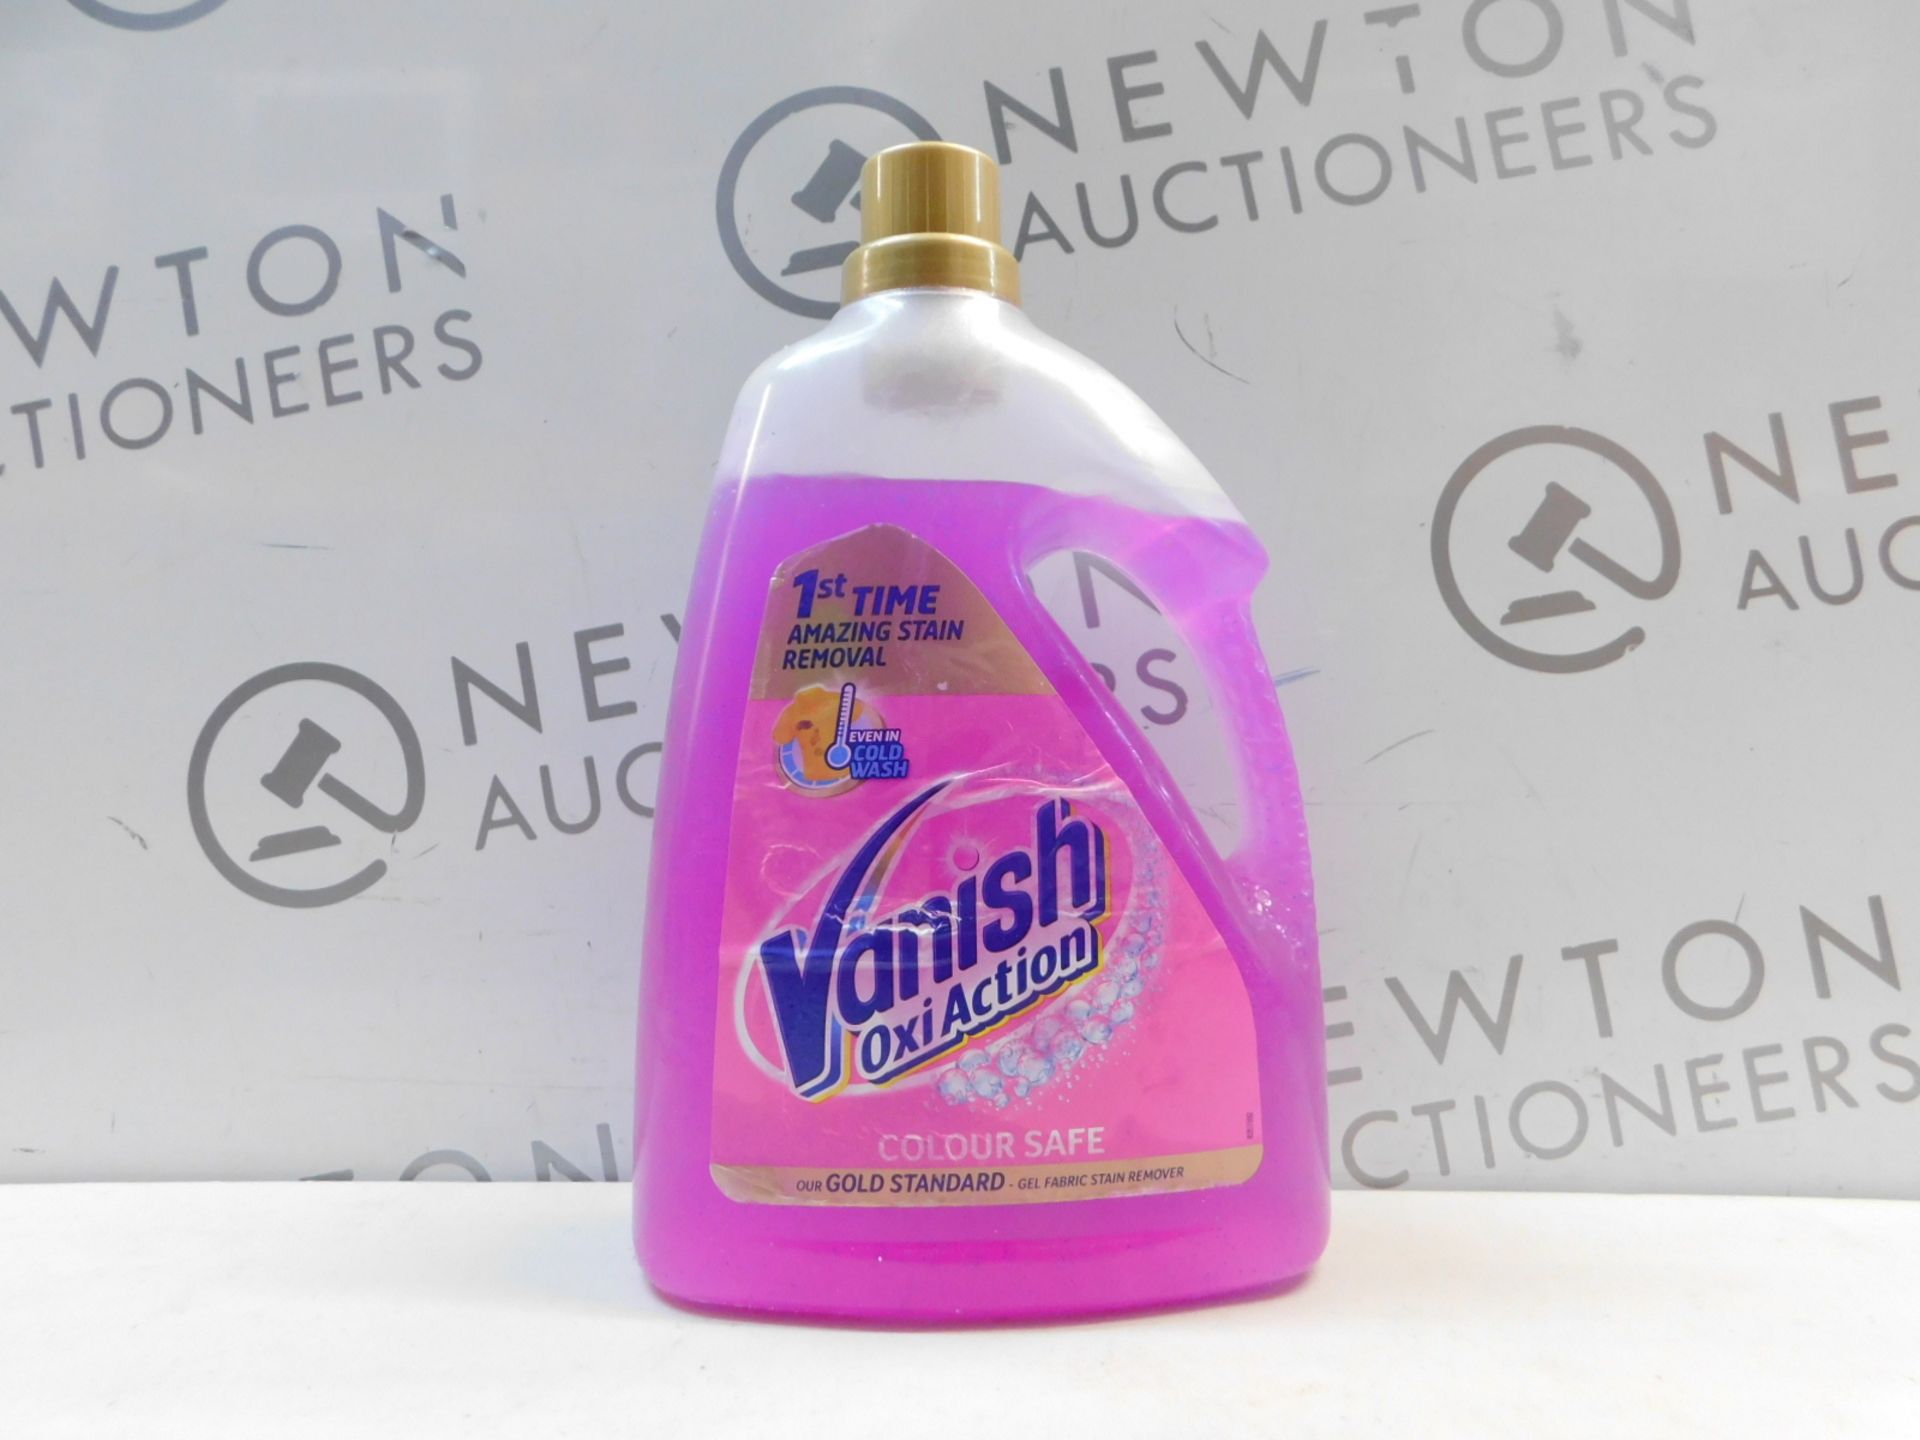 1 VANISH GOLD OXI ACTION GEL FABRIC STAIN REMOVER 2.25L RRP Â£12.99